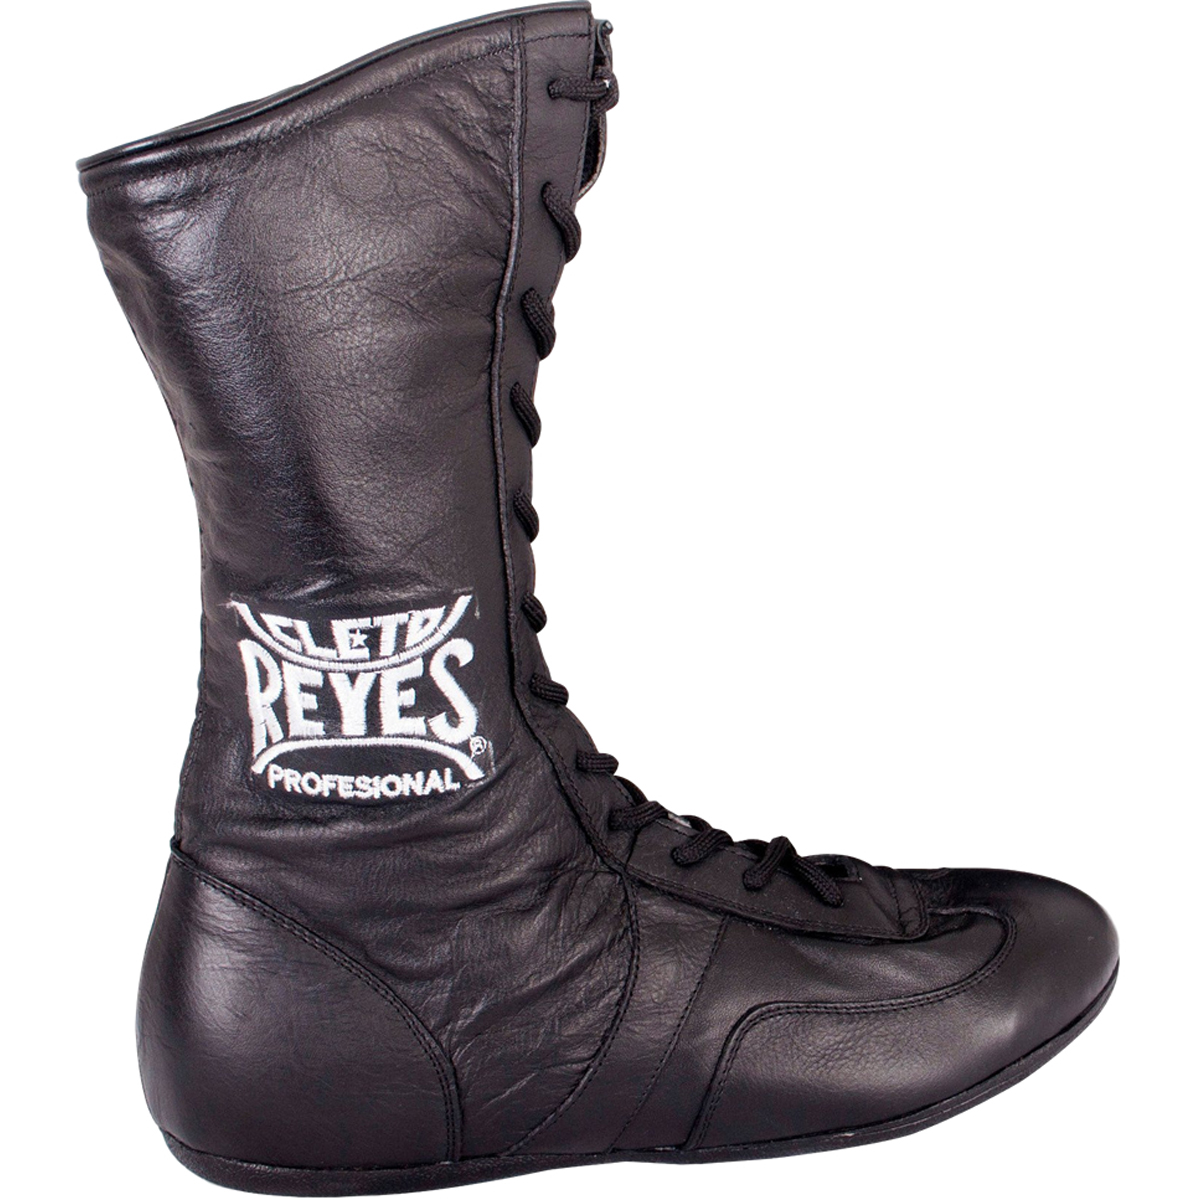 Cleto Reyes Leather Lace Up High Top Boxing Shoes - Size: 7 - Black - image 2 of 4